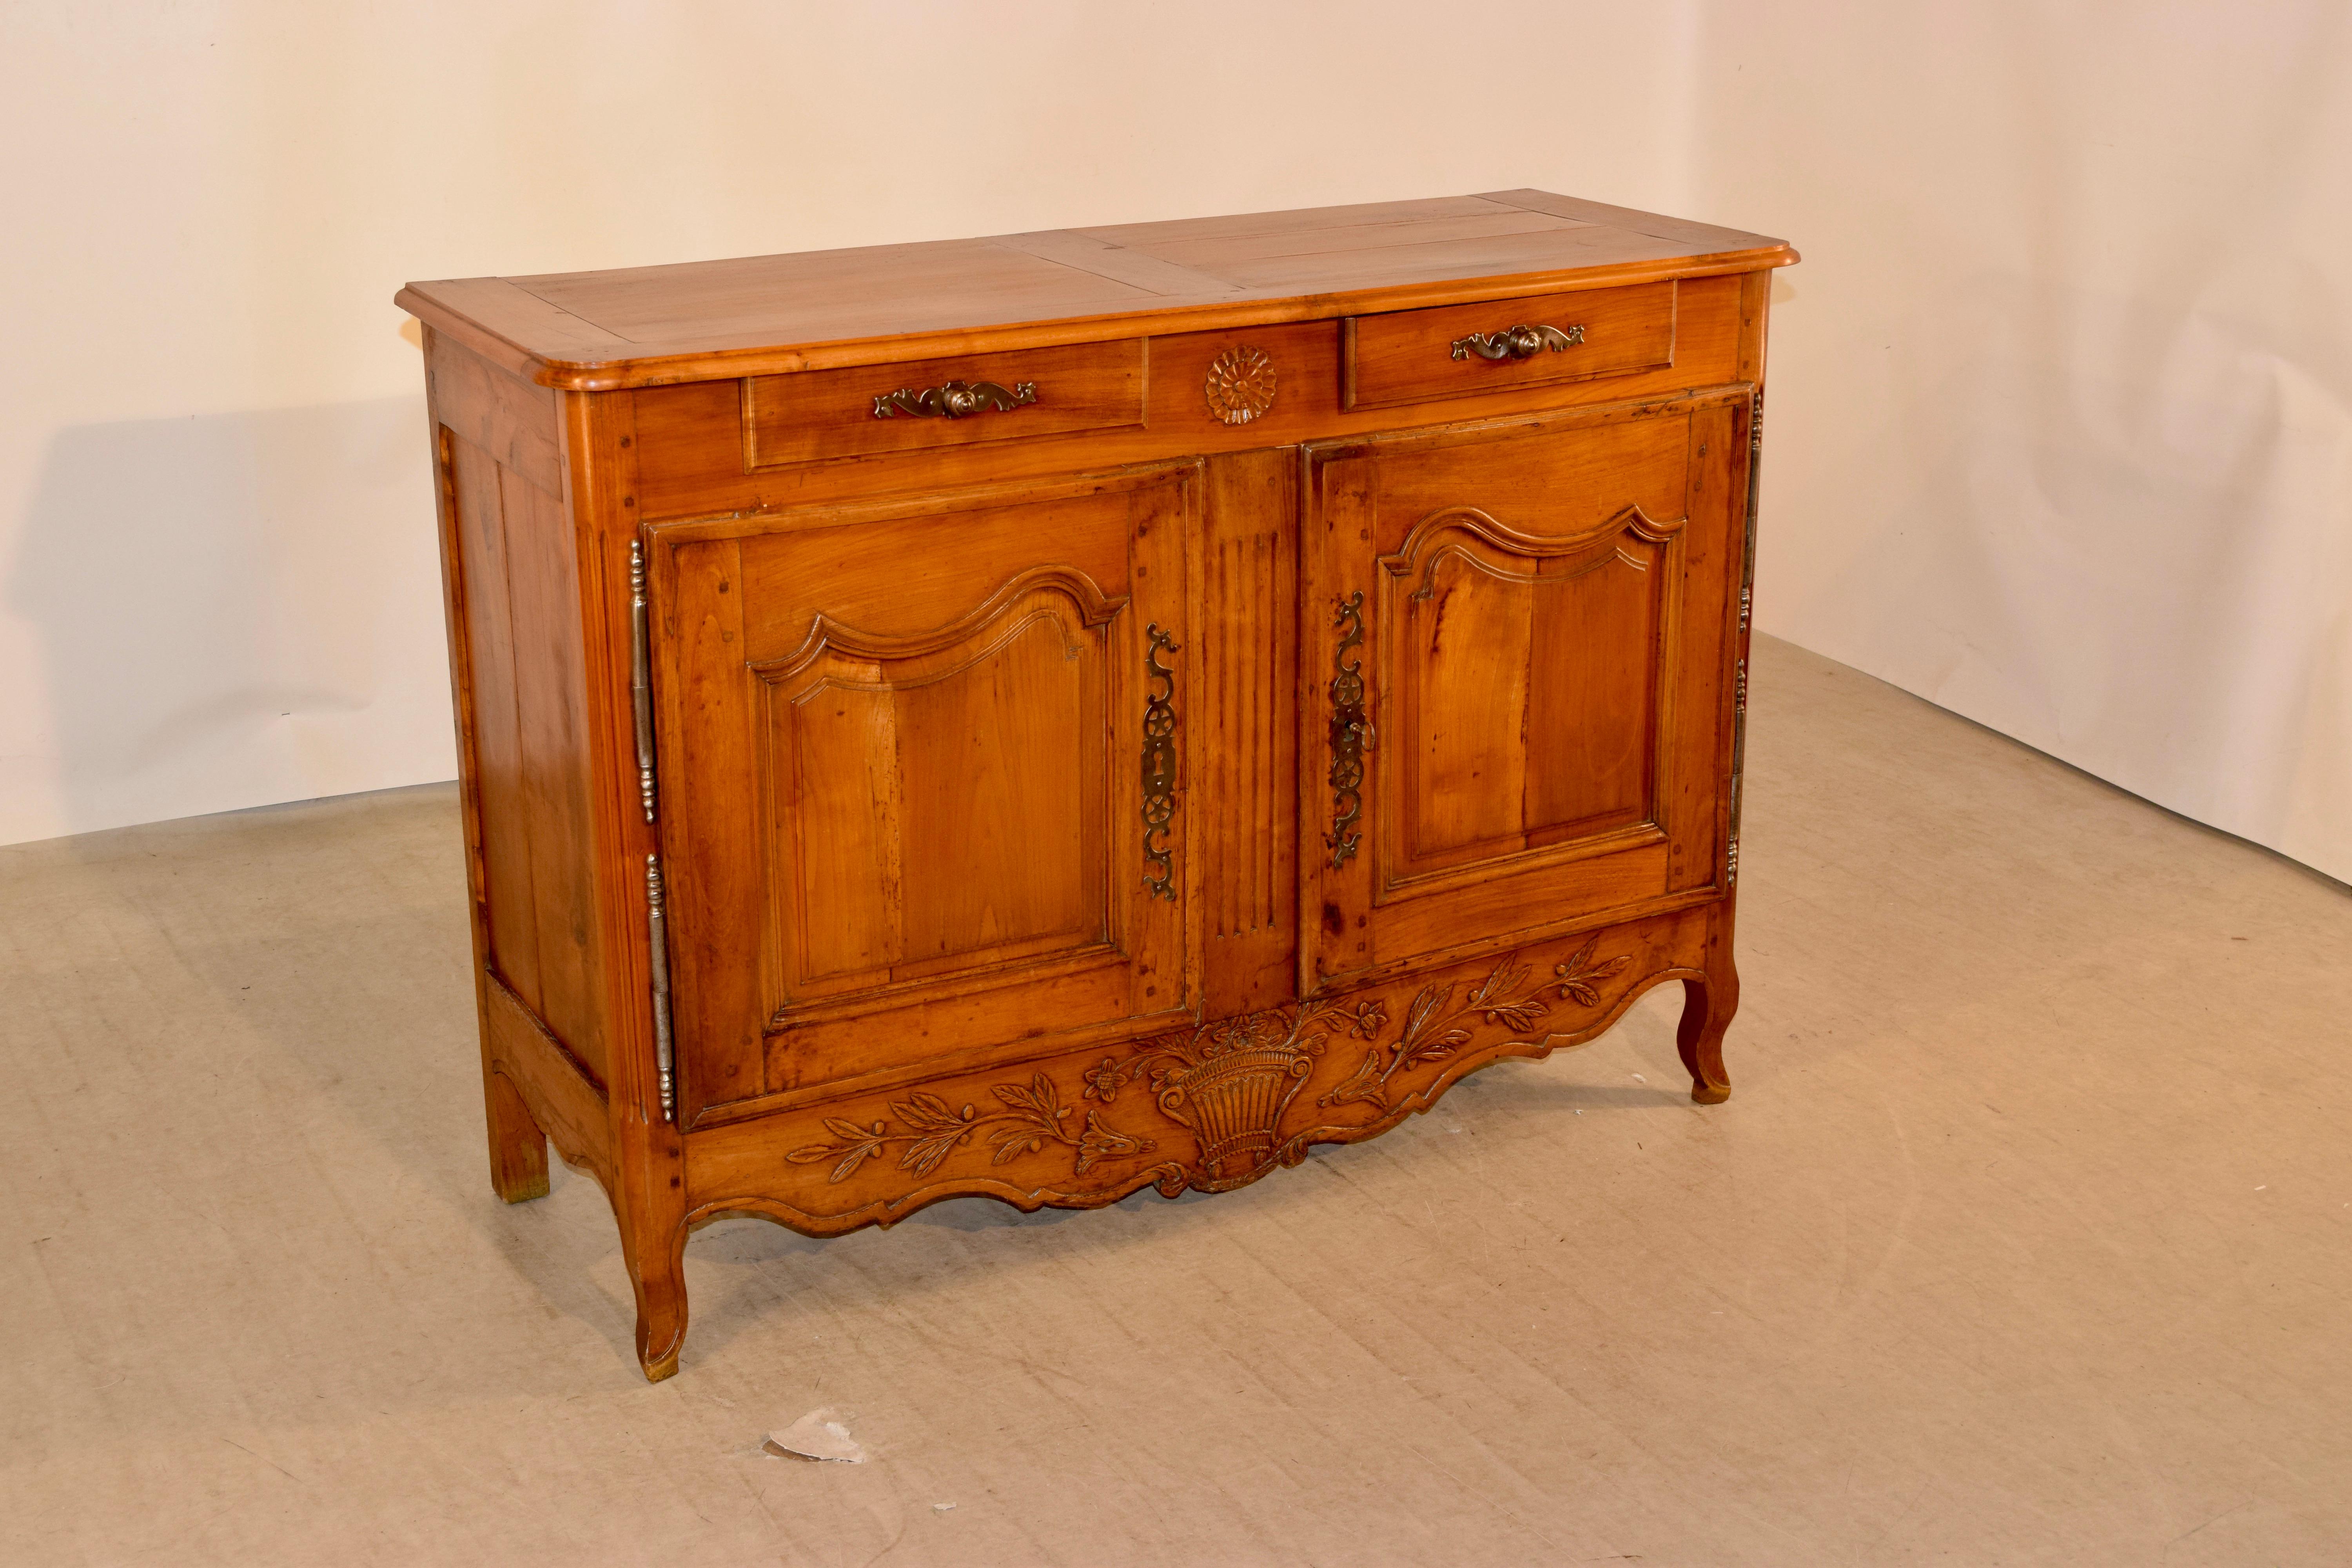 18th century cherry buffet from France. The top is banded and has a beveled edge, following down to a case with paneled sides and two drawers over two wonderfully paneled doors, which open to reveal storage. It has a lovely hand carved and scalloped